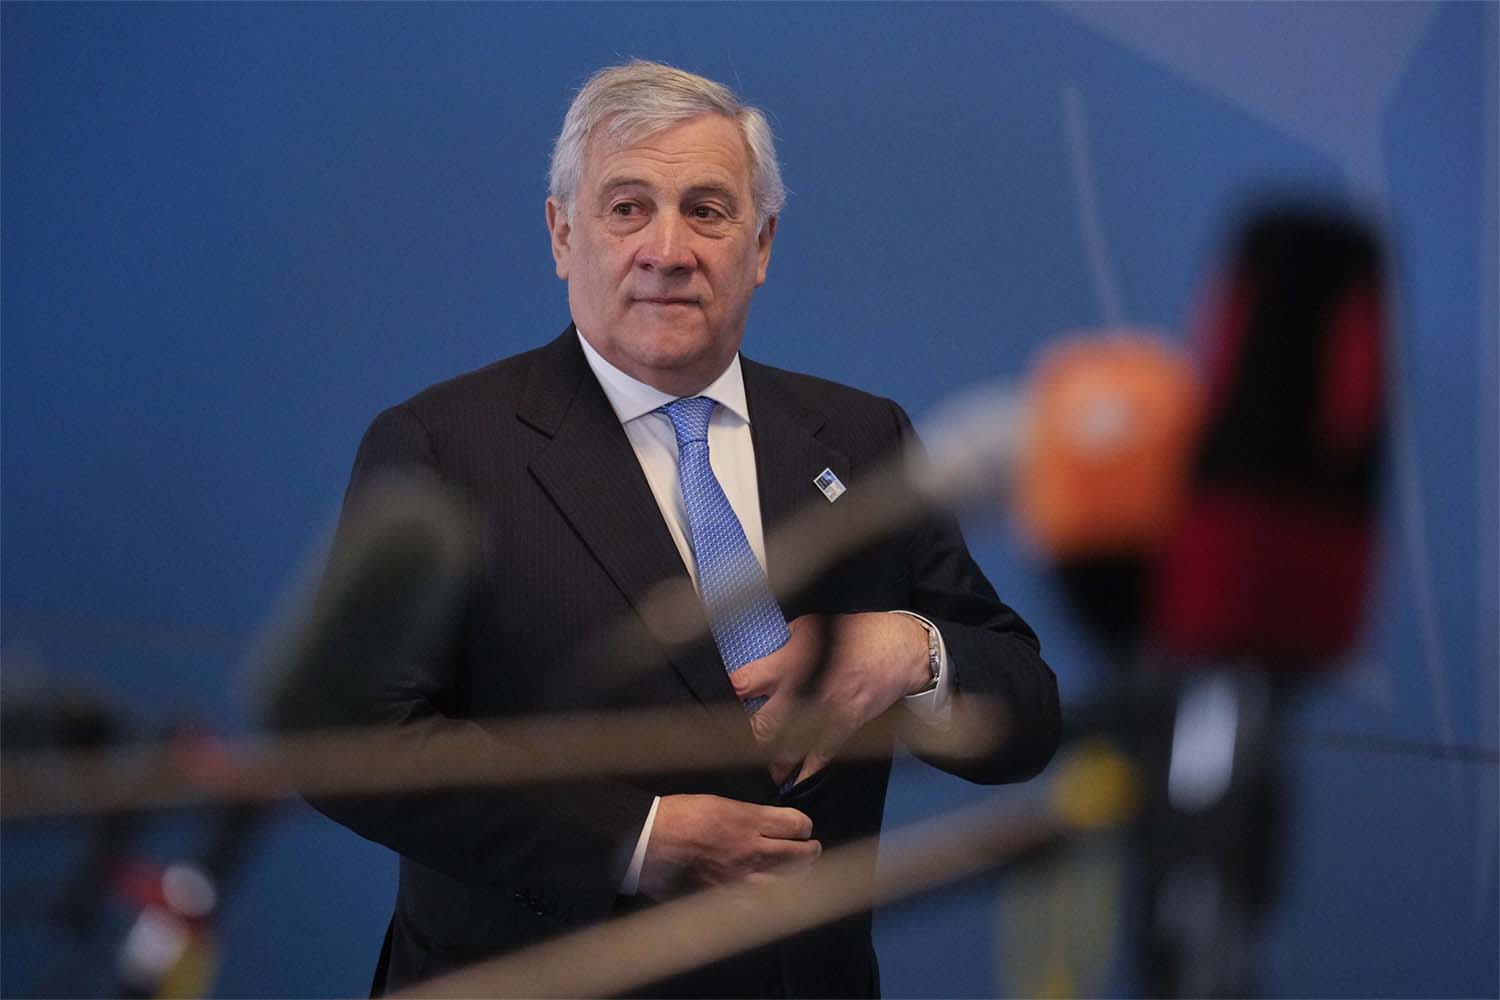 Tajani said Italy was asking that Tehran suspend the death penalty in connection with the protests